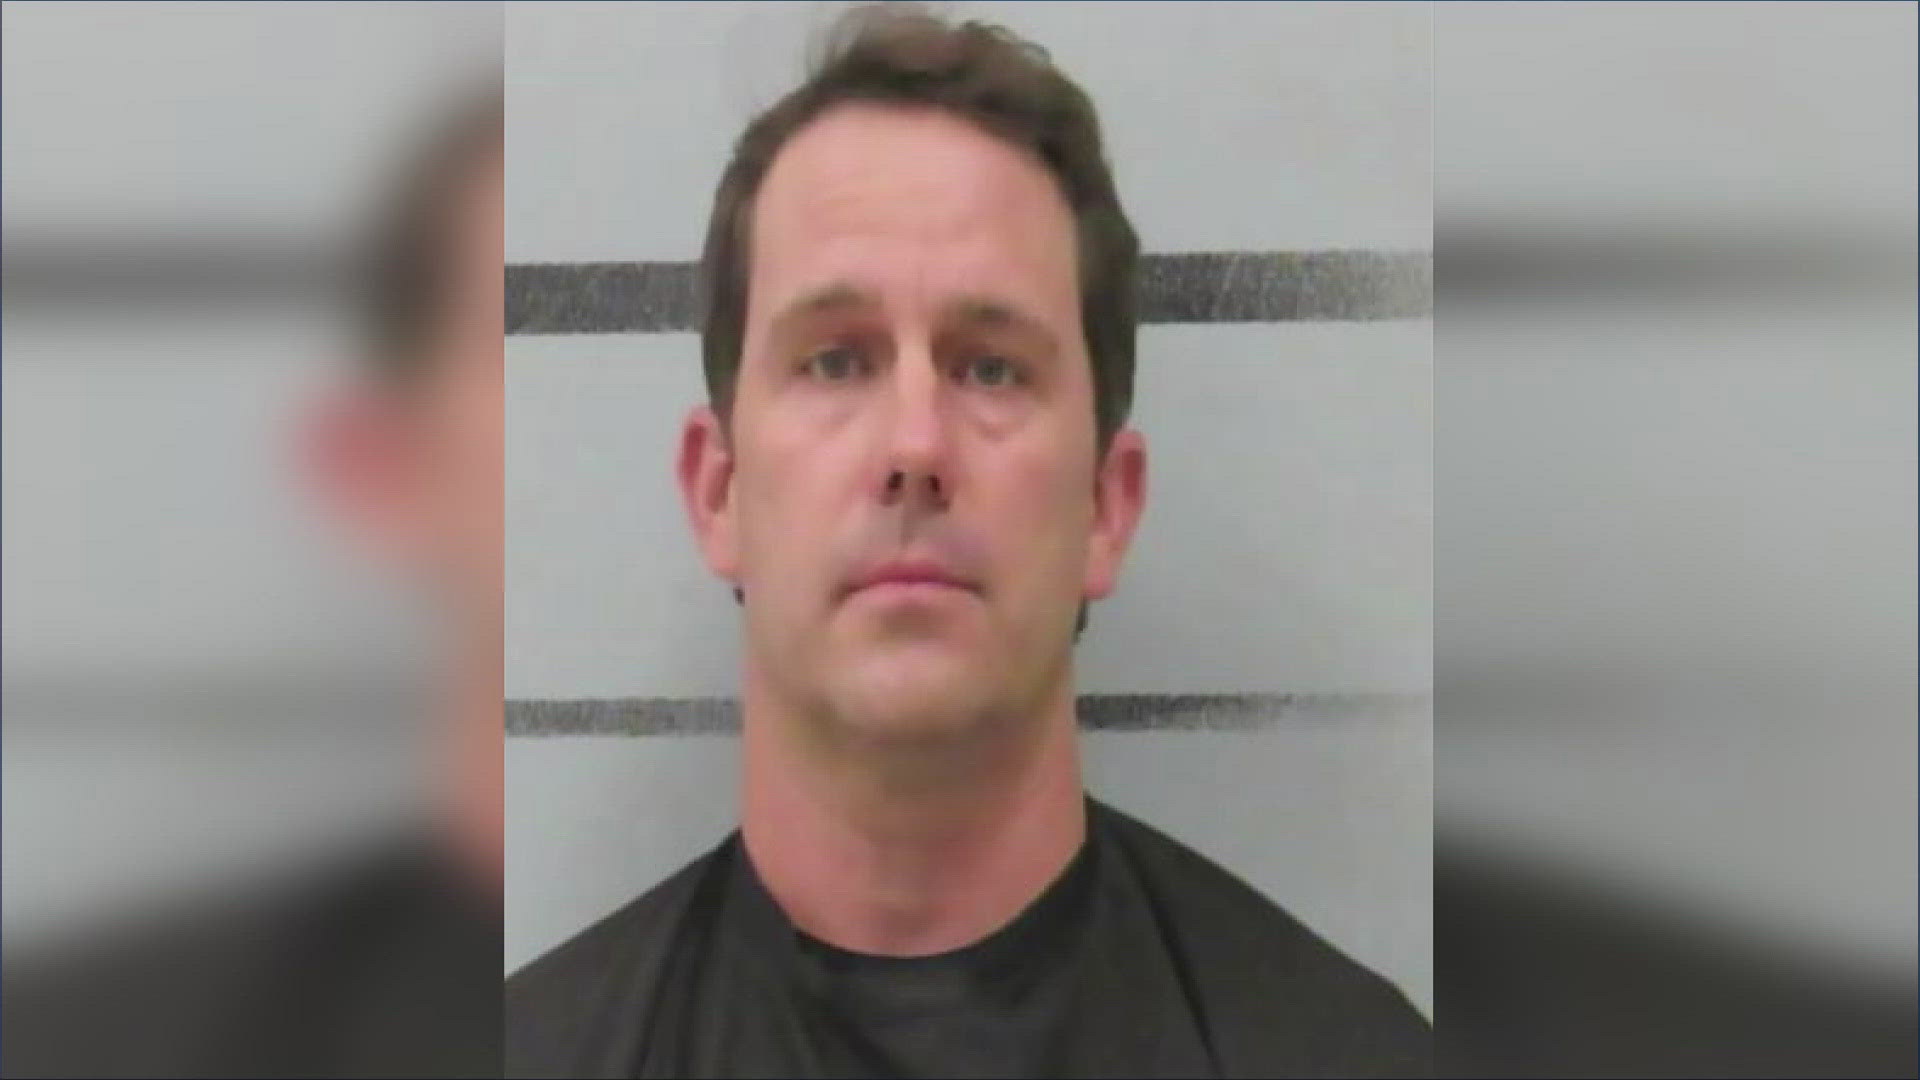 The 41-year-old man had previously served as a youth pastor at a church in Lubbock and was reported to police by a Granbury church prior to his arrest.